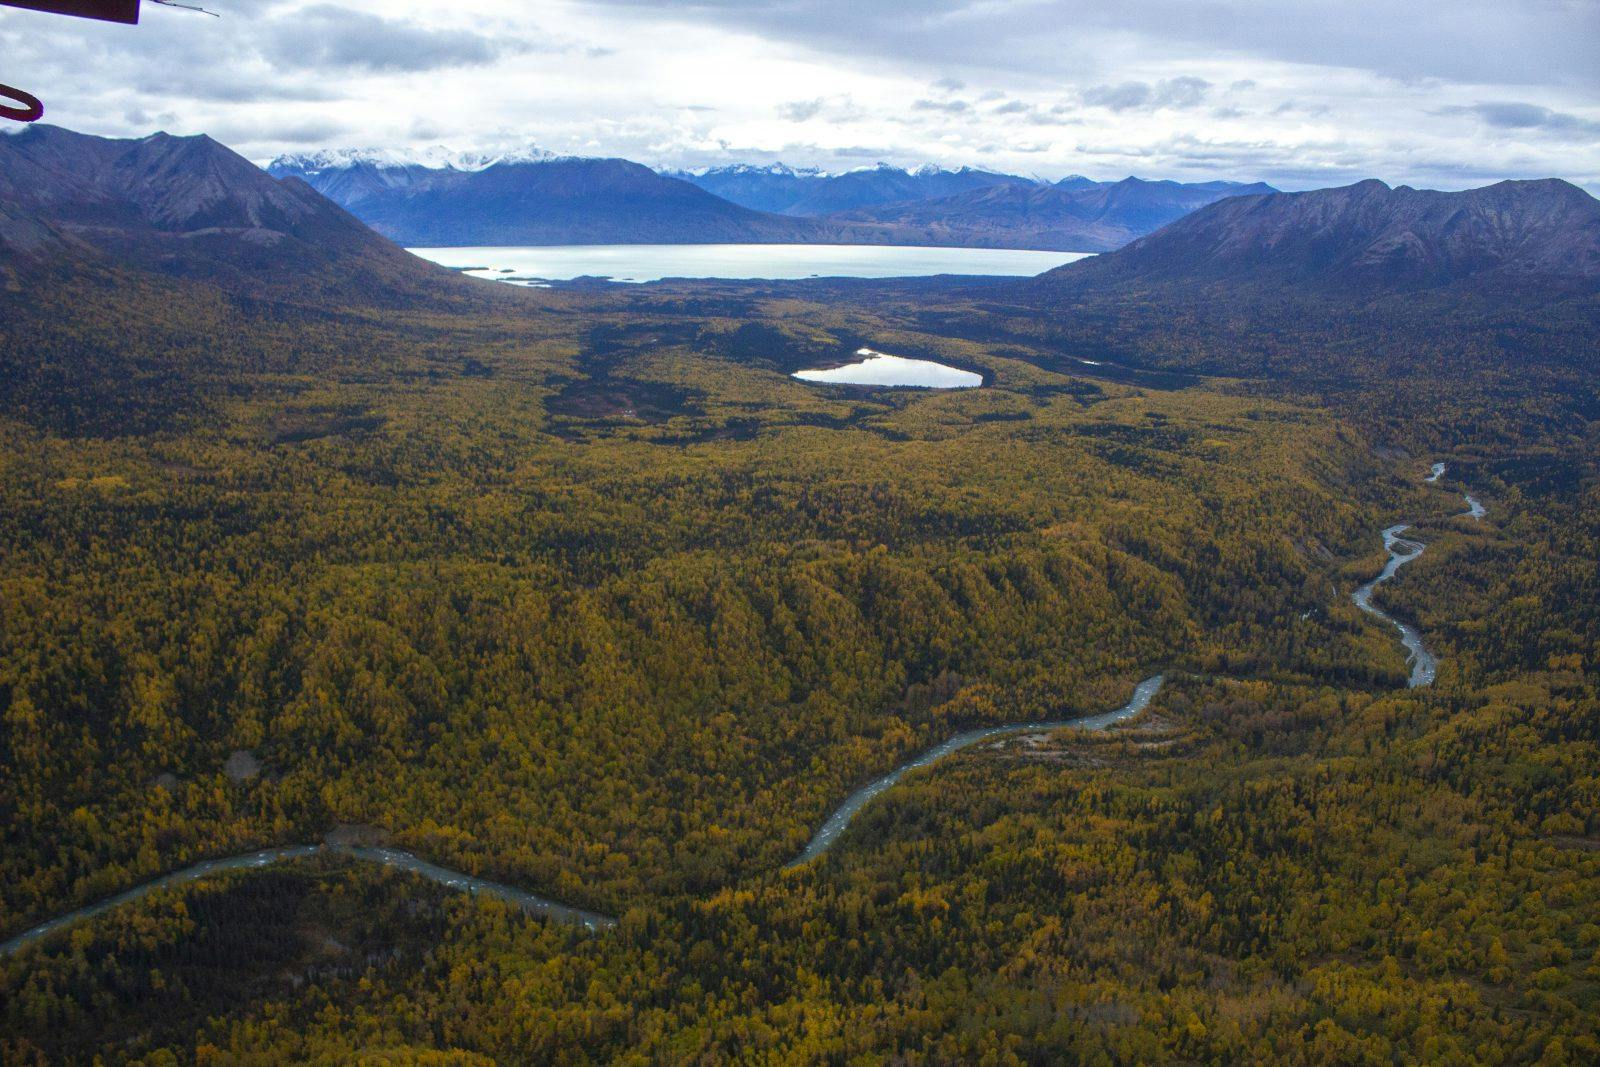 Packrafting potential near Lake Clark, as seen by bush plane. Photo by: Sam Carter